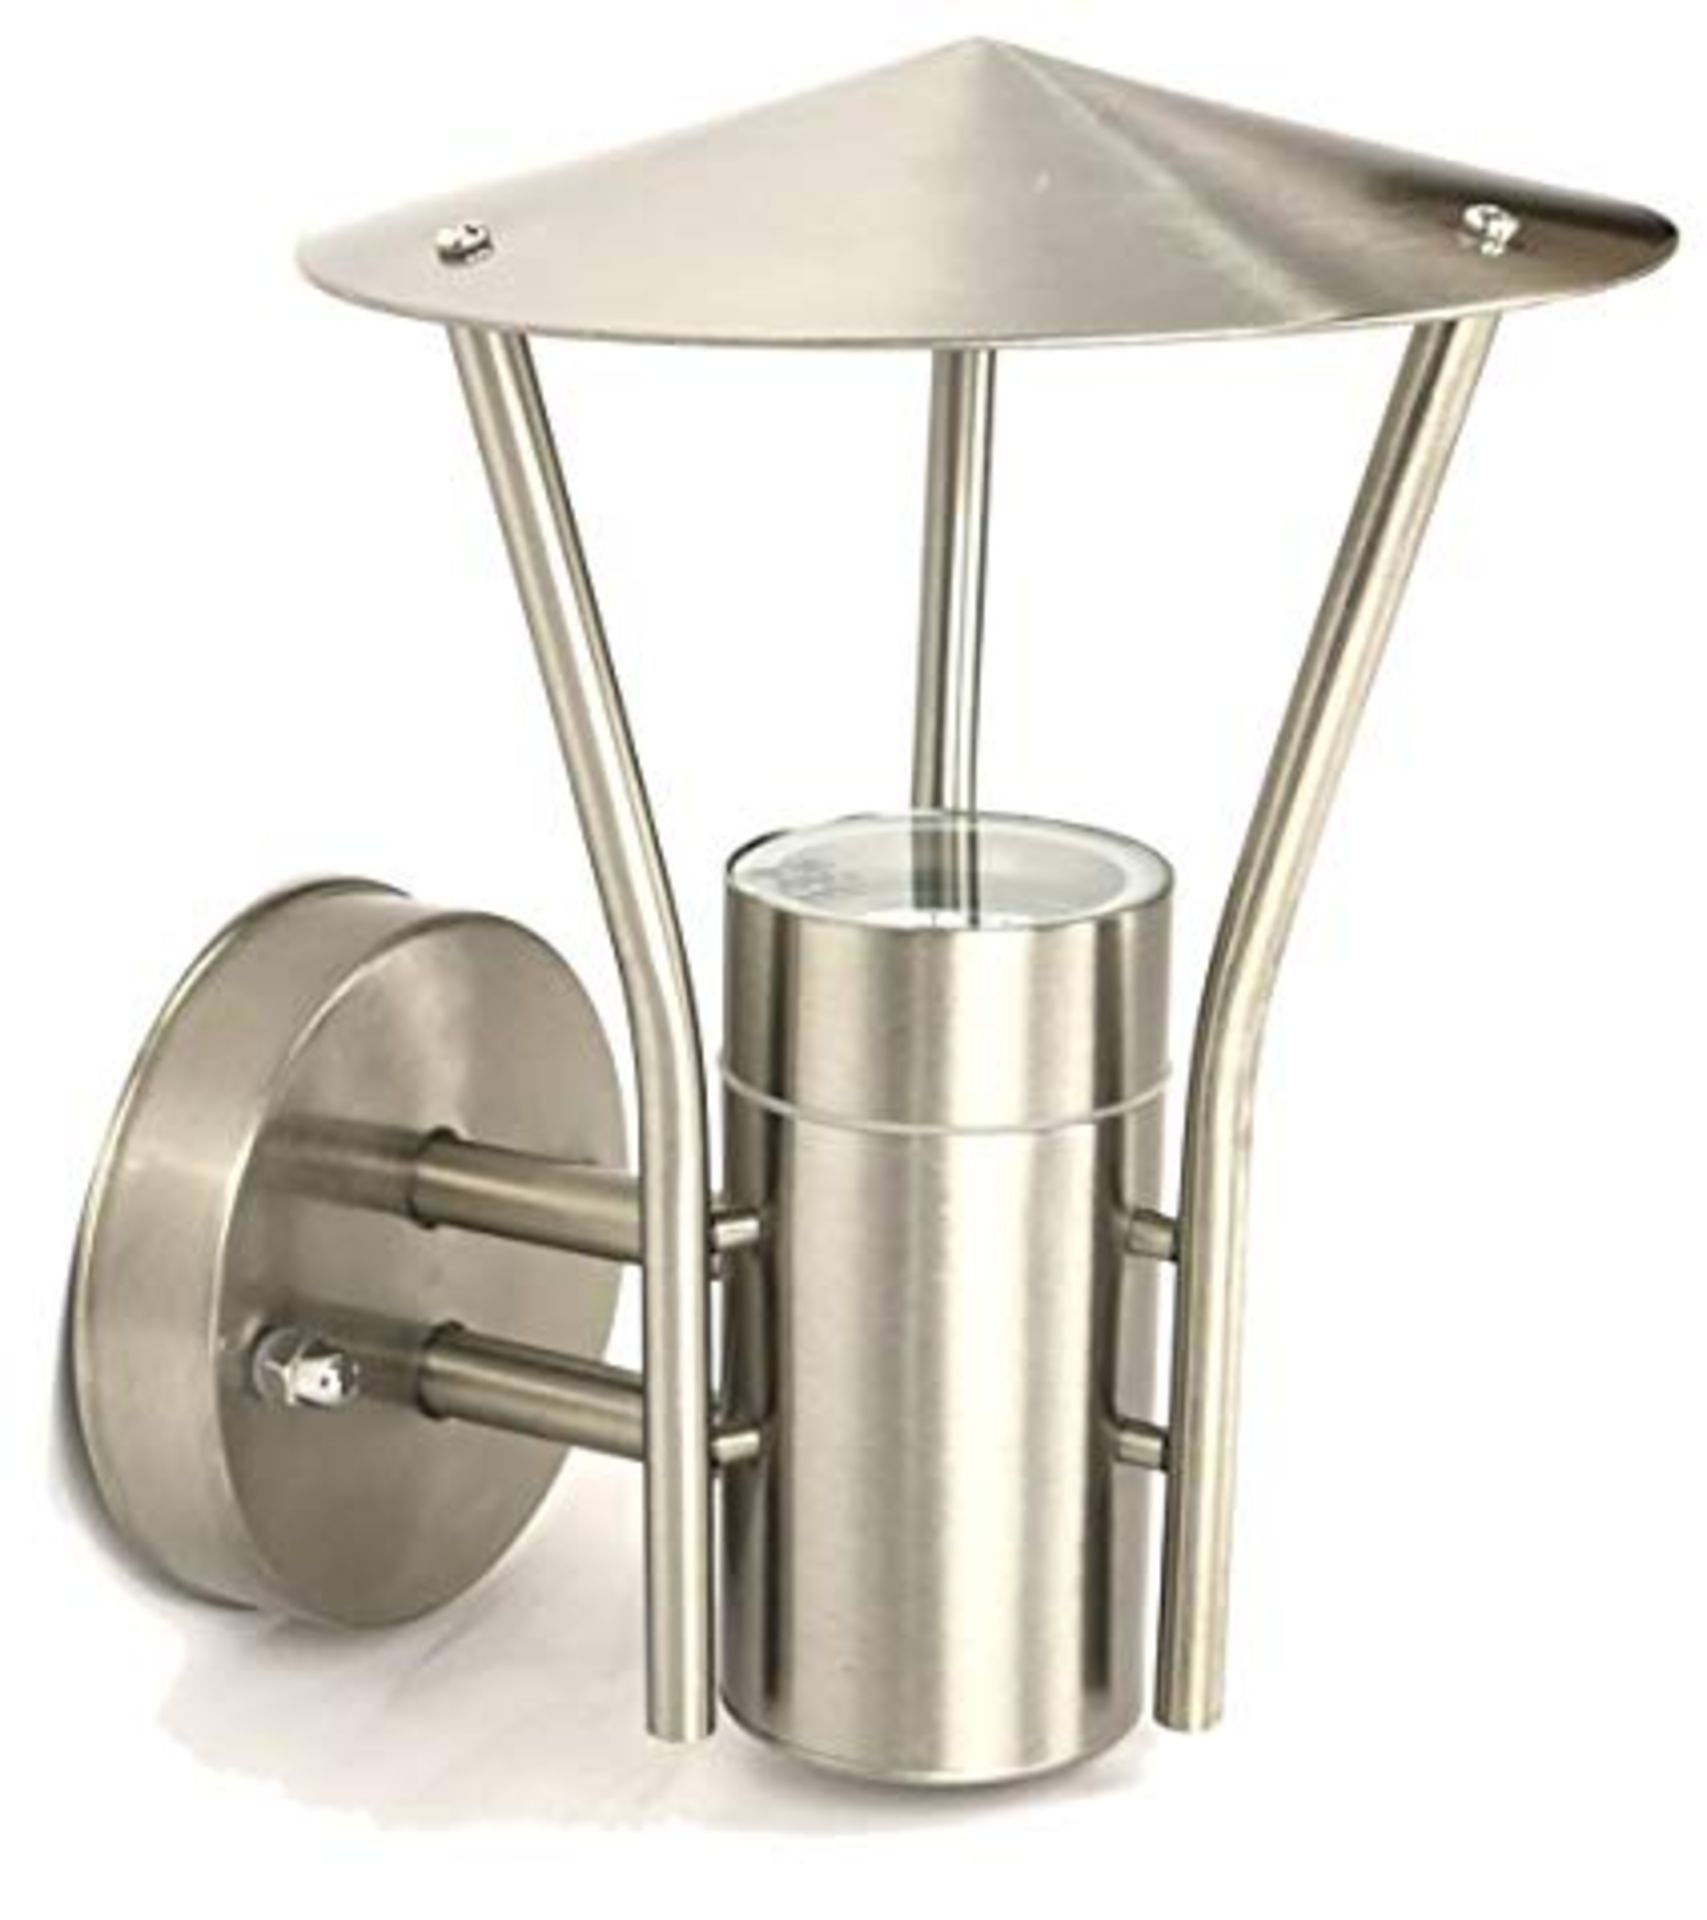 V Brand New Pippa Stainless Steel Wall Light - Mains Powered - Max 35W